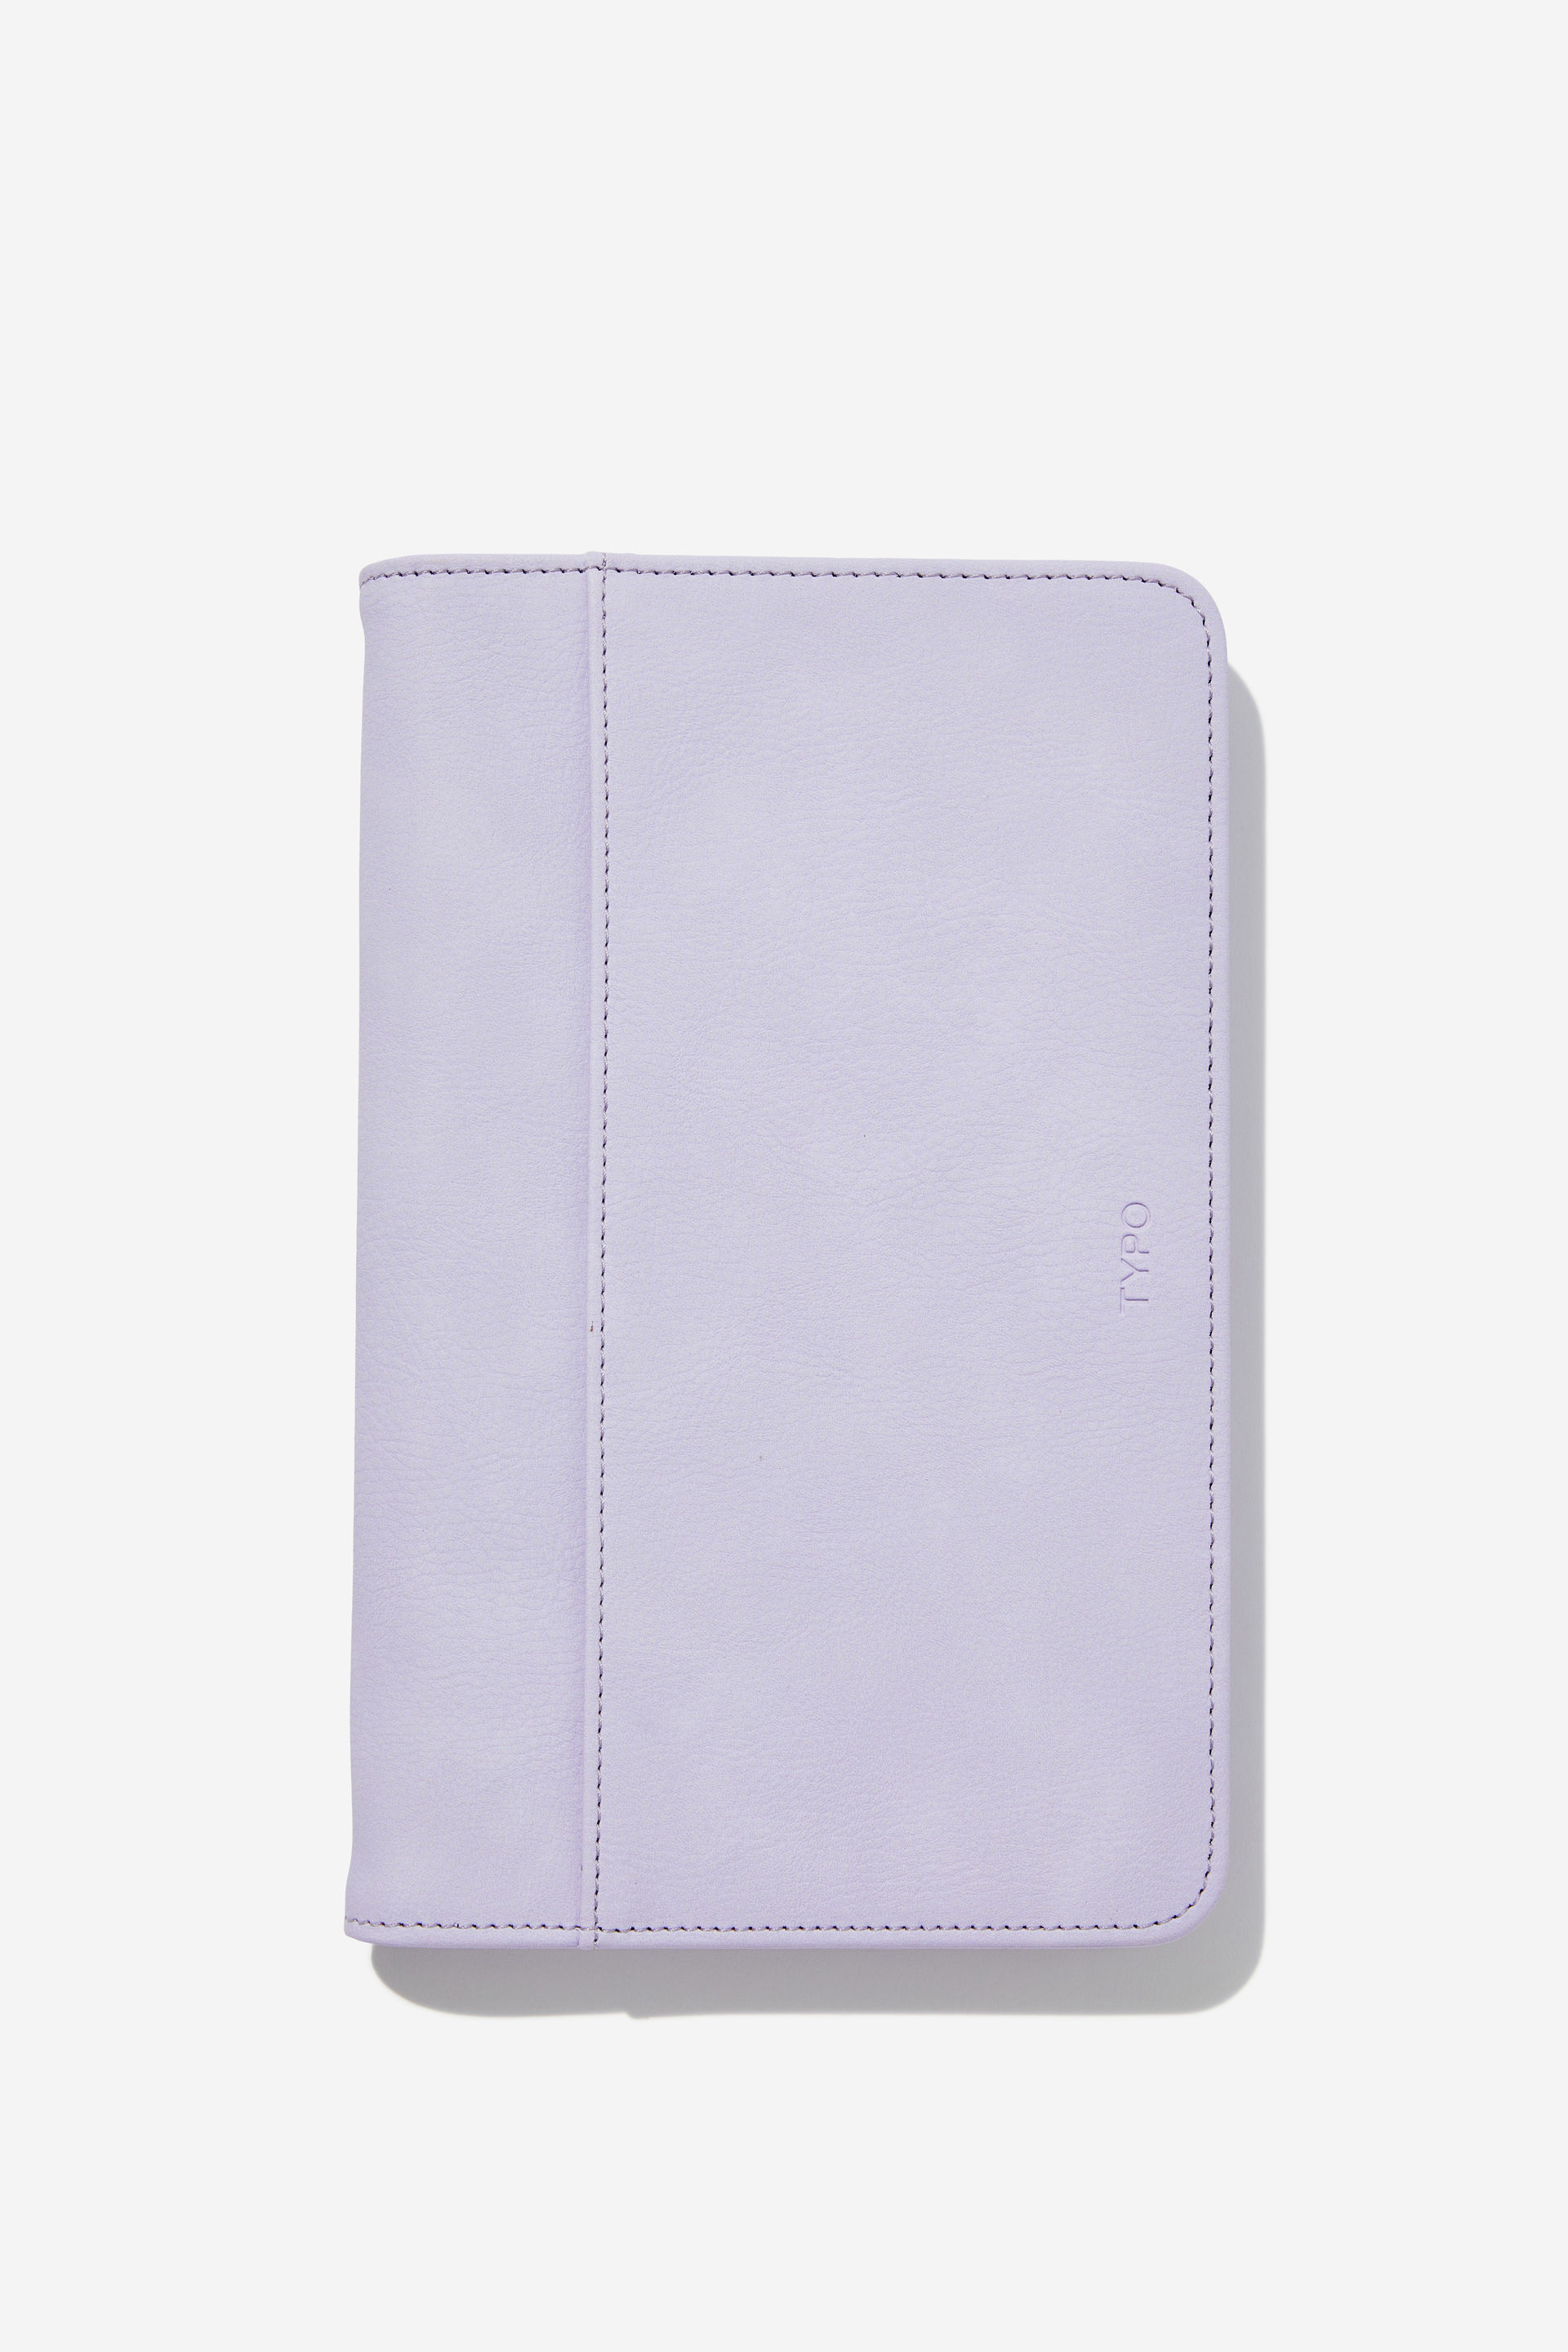 Typo - Off The Grid Travel Wallet - Soft lilac